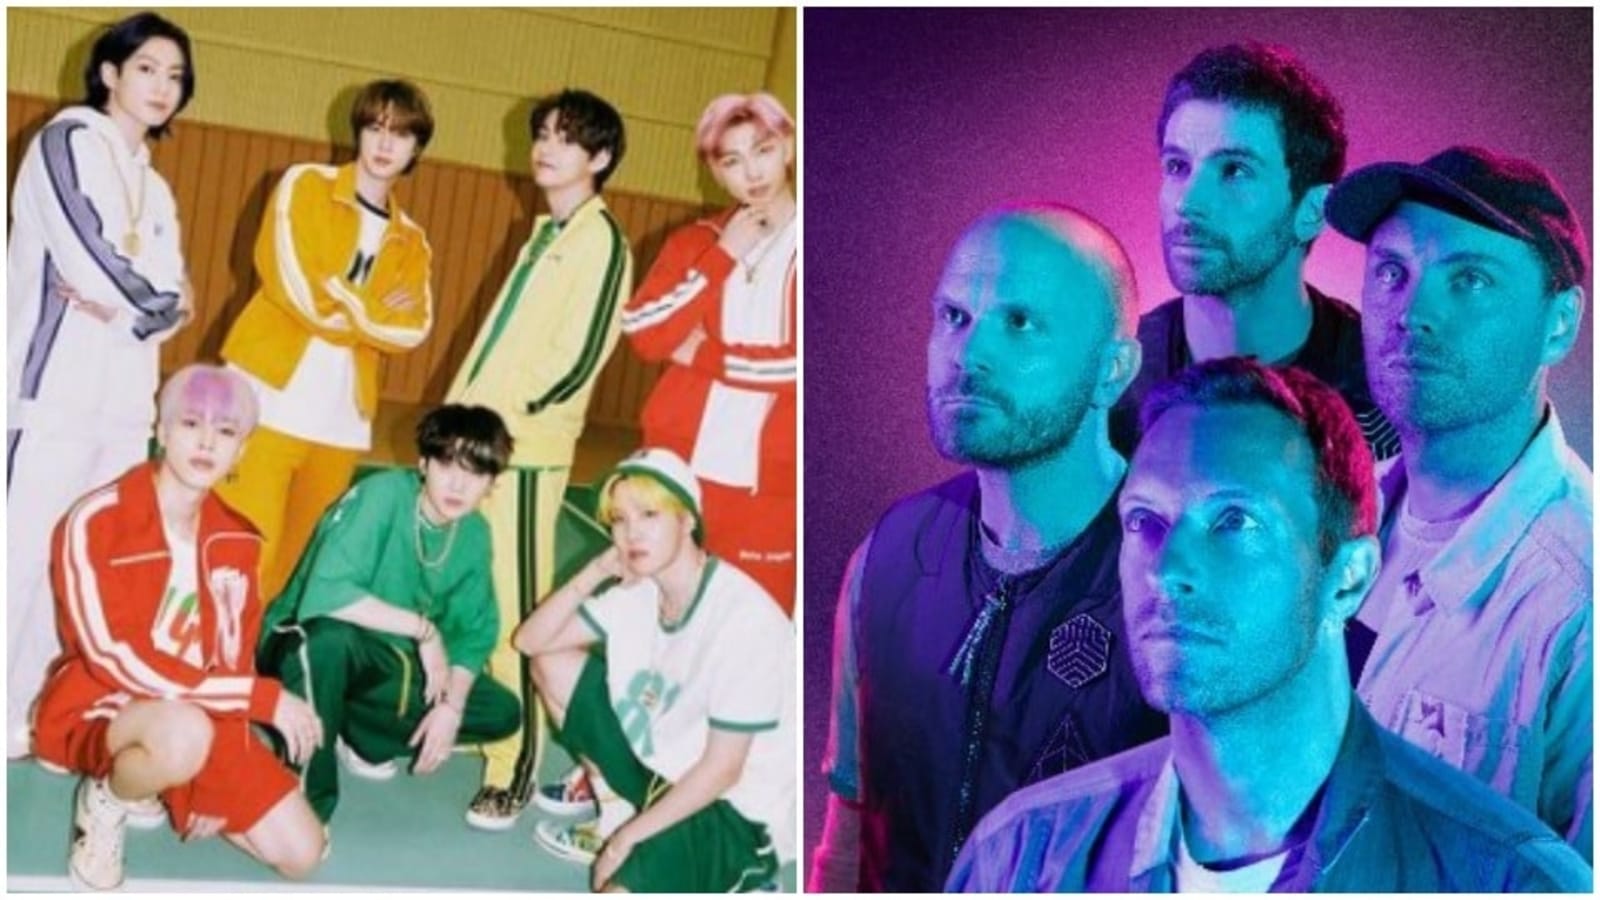 BTS and Coldplay team up to rock the American Music Awards